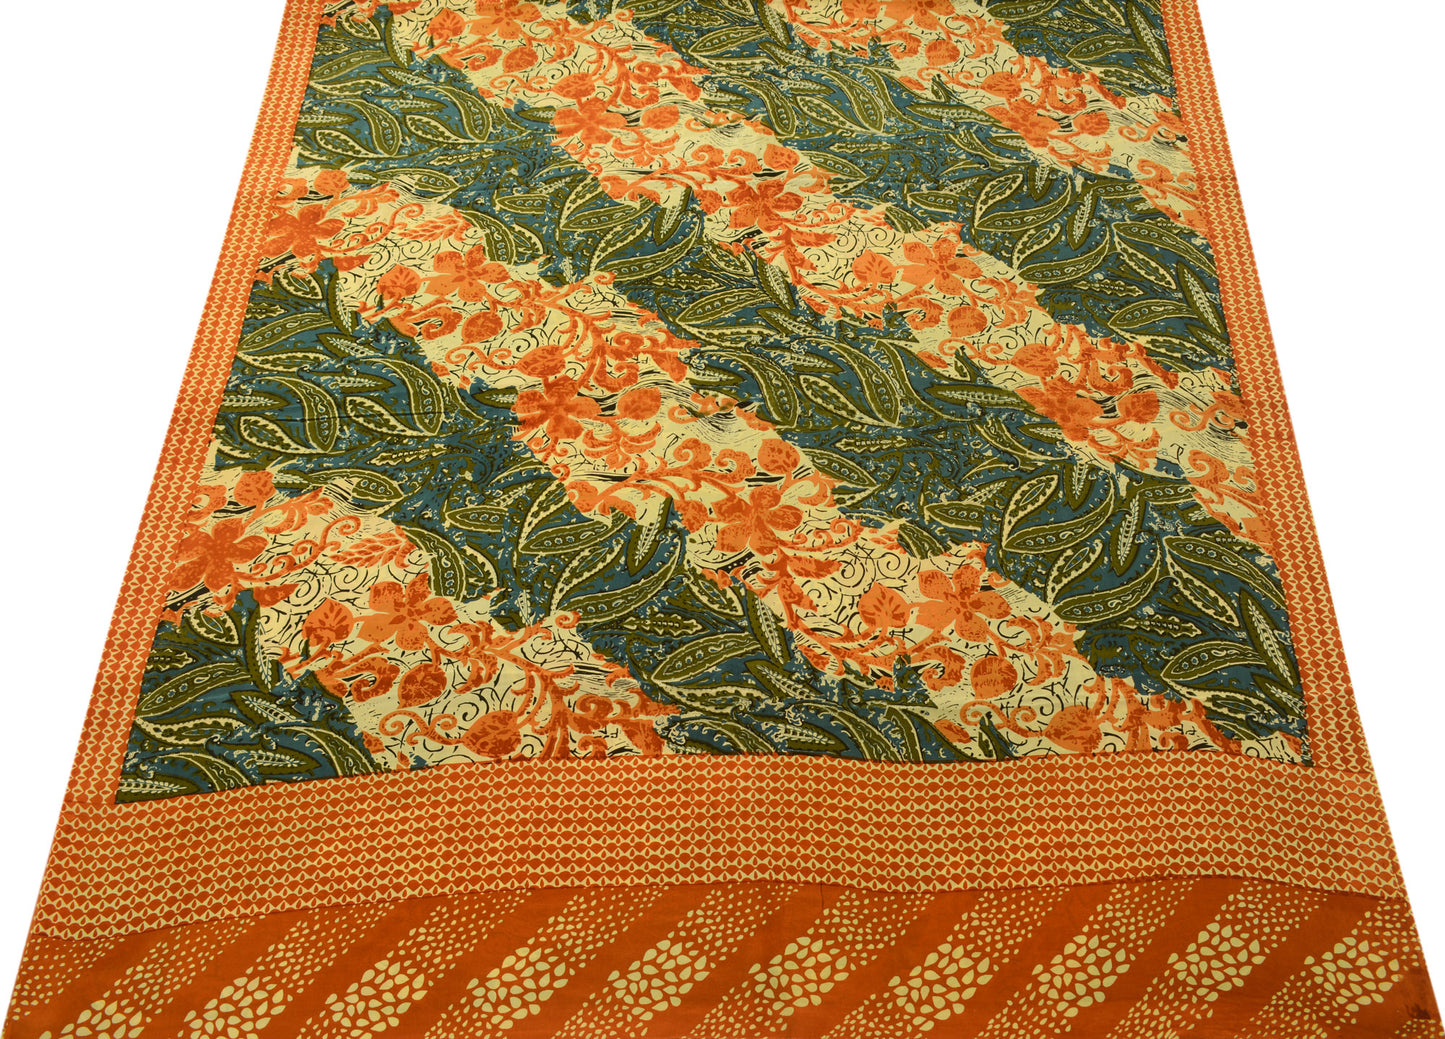 Sushila Vintage Indian Saree 100% Pure Crepe Silk Printed Floral 5YD Soft Fabric